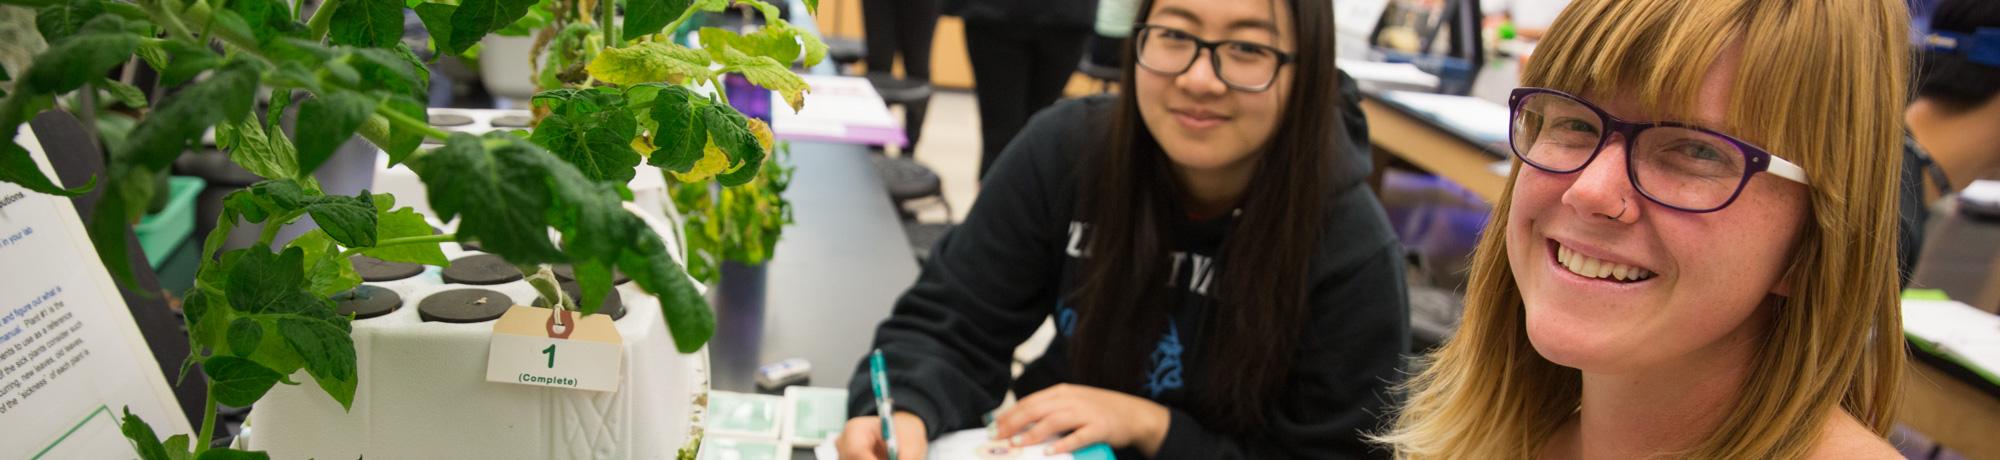 students perform a lab experiment on plants